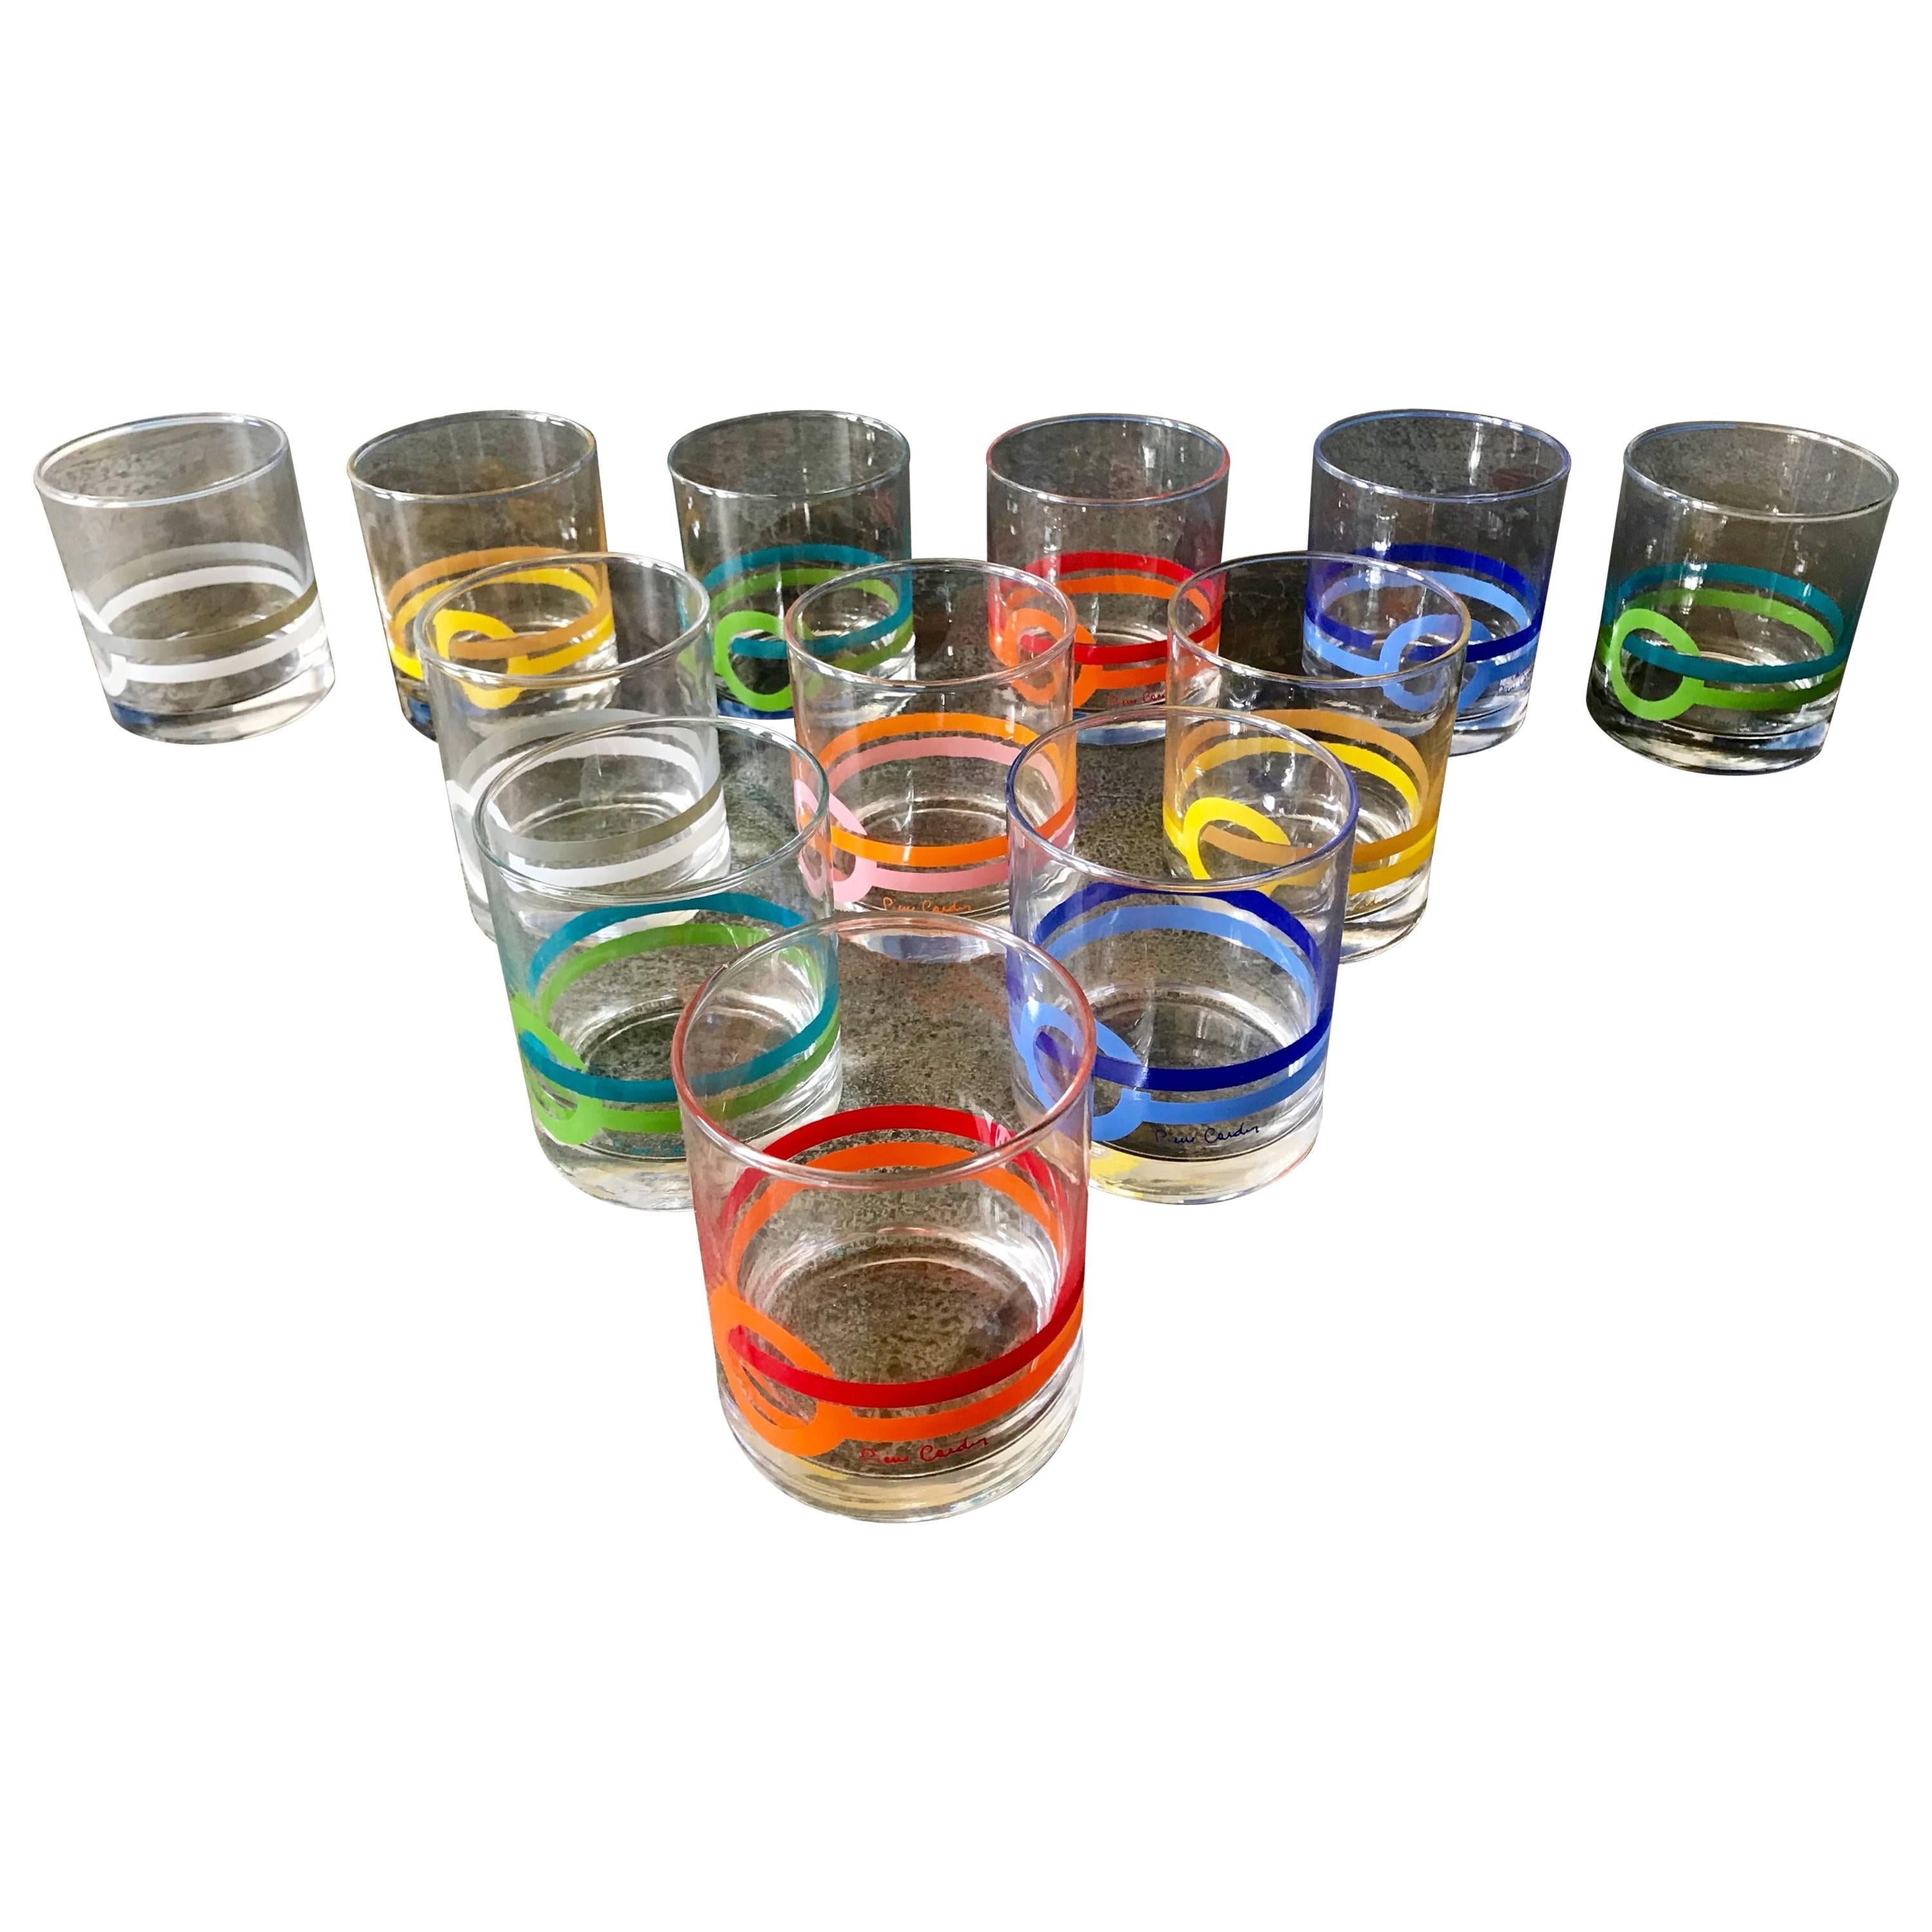 Rare Set of 12 Pierre Cardin Modern Cocktail Glasses, "On The Rocks", 1980s